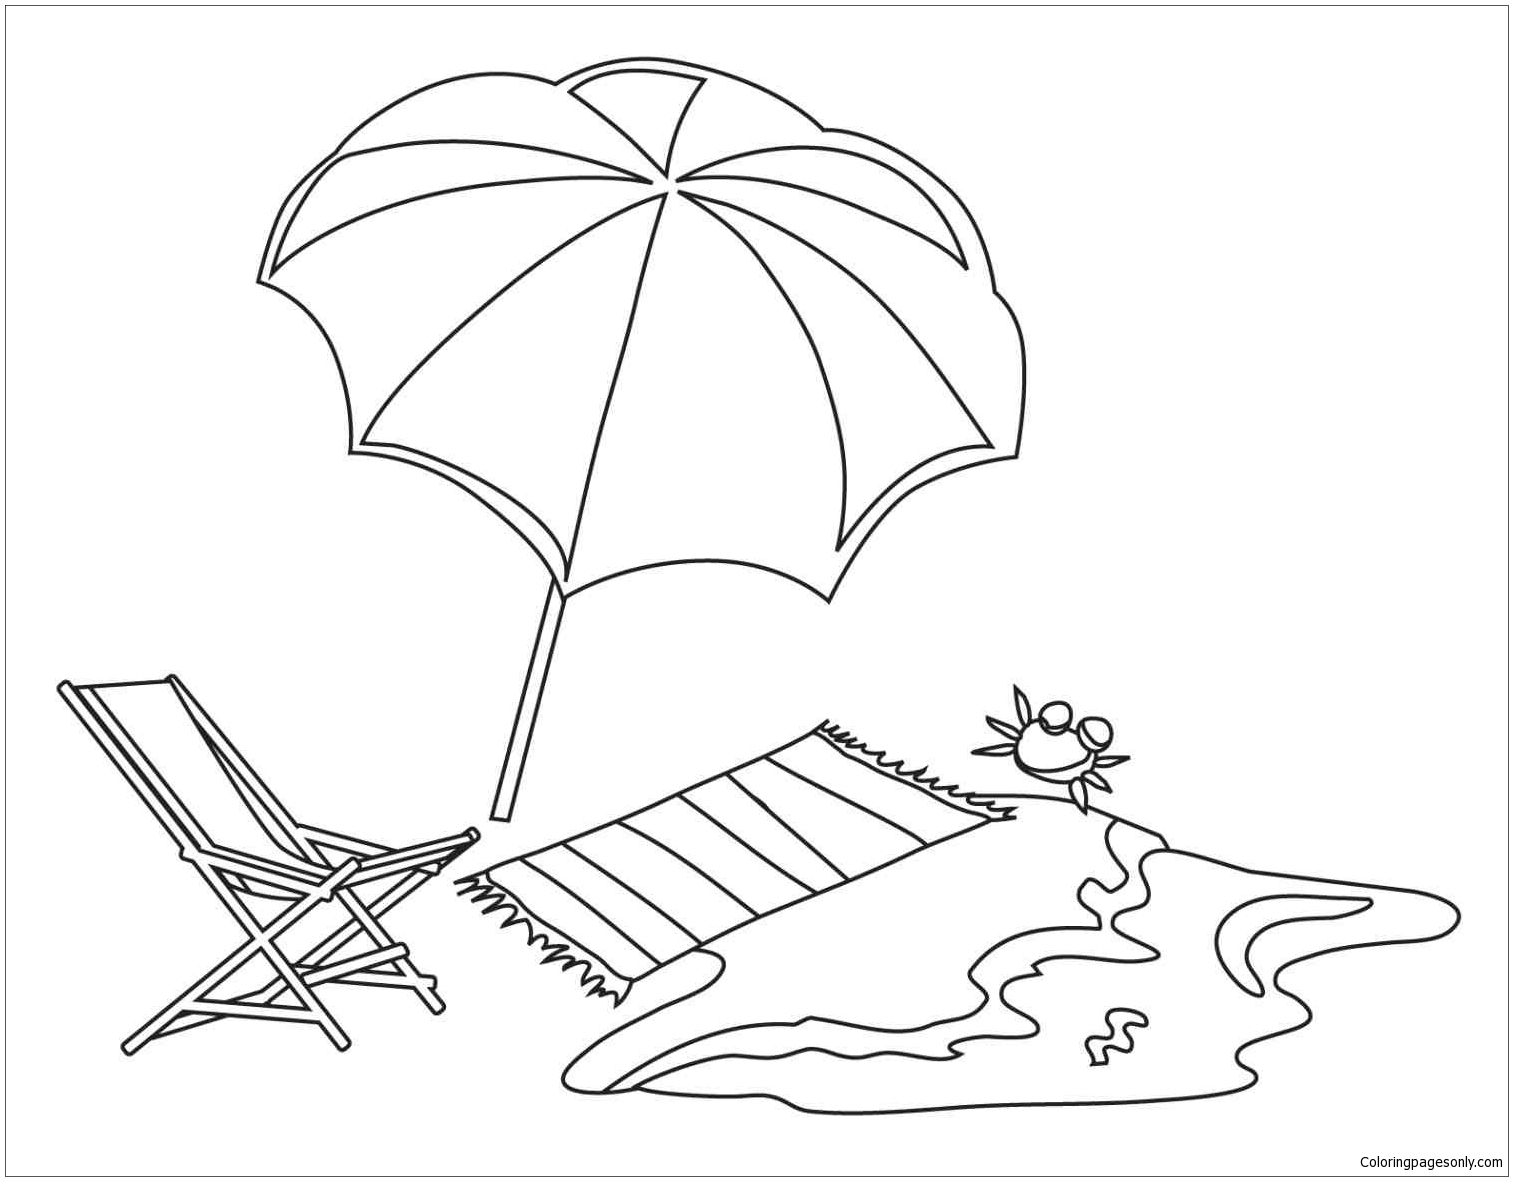 beach-theme-1-coloring-pages-nature-seasons-coloring-pages-free